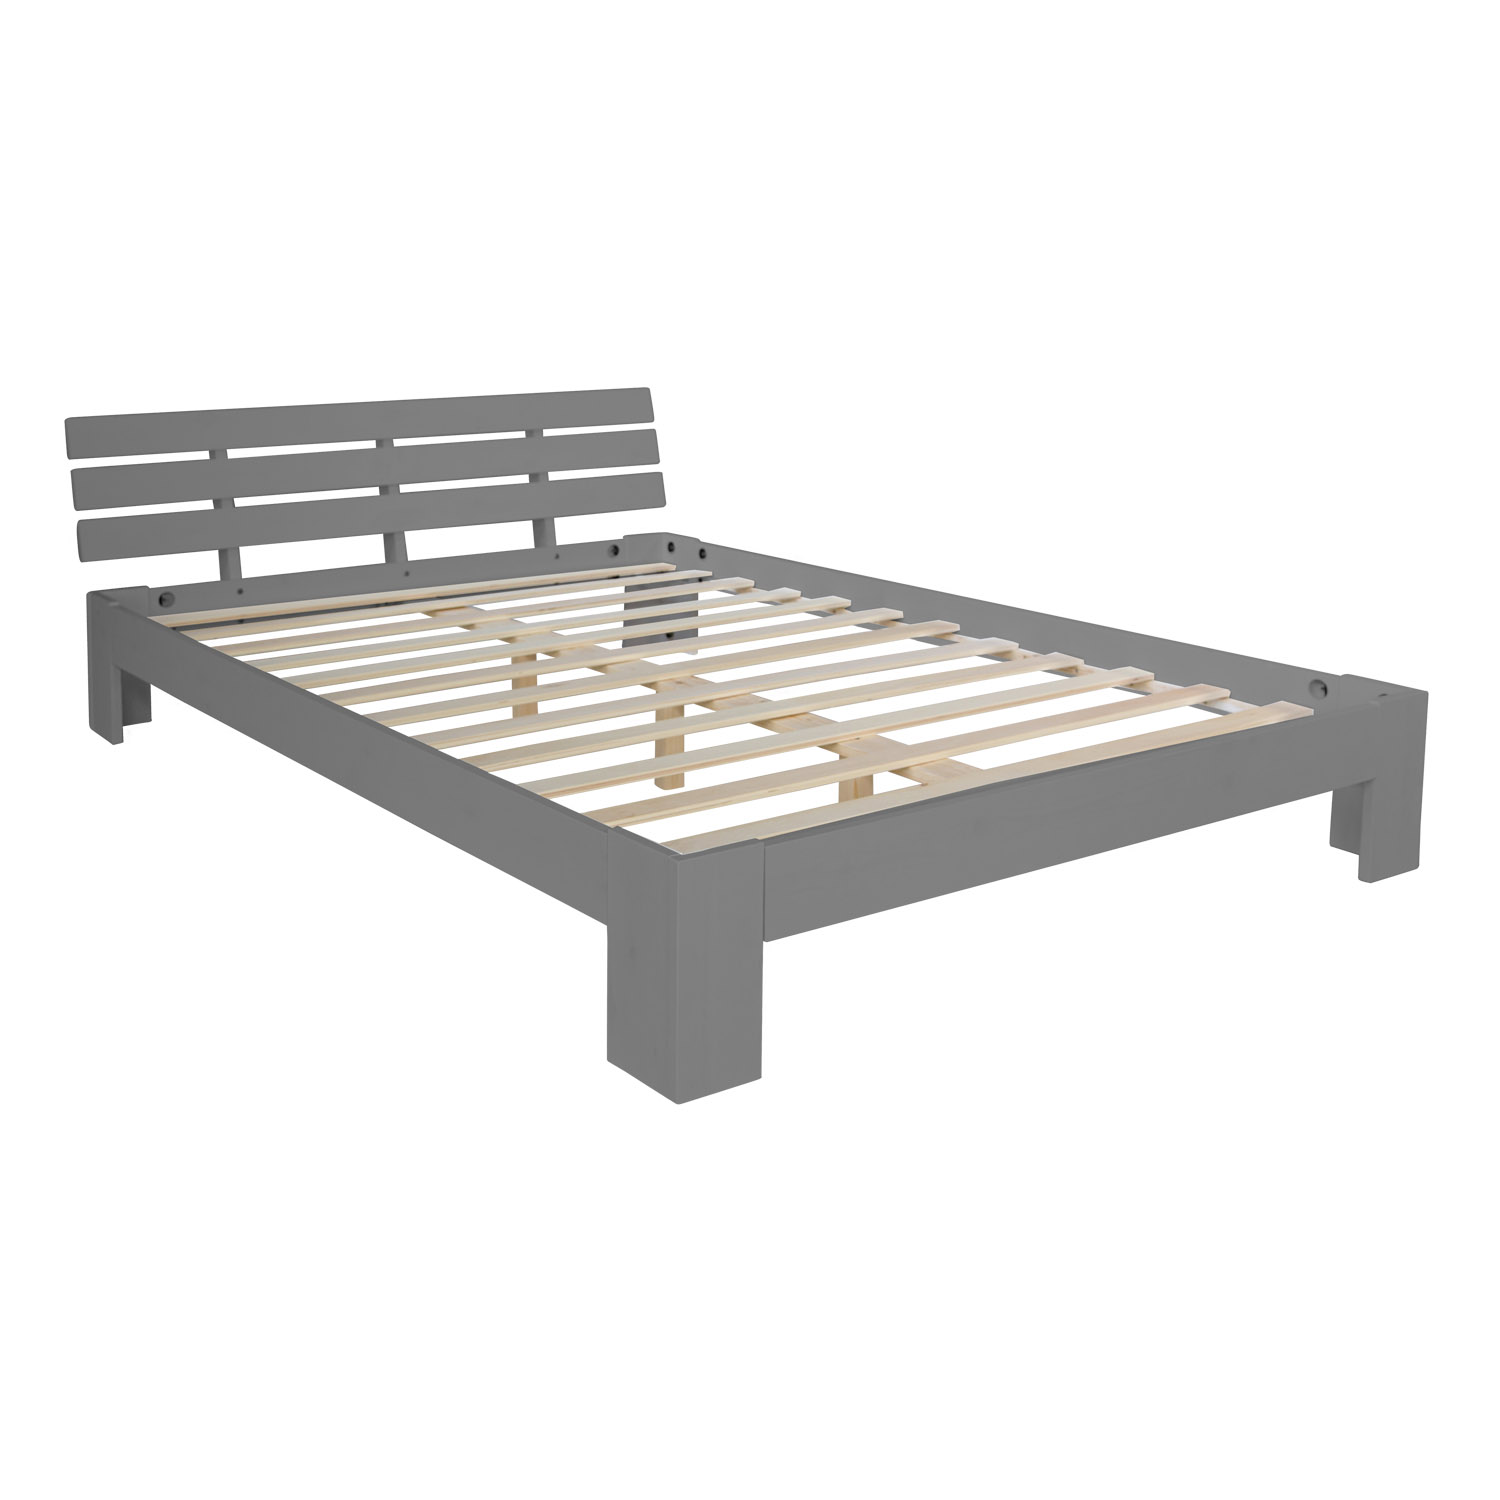 Double Bed Wooden Bed Futon Bed 120x200 Grey Pine Bed Frame Solid Wood